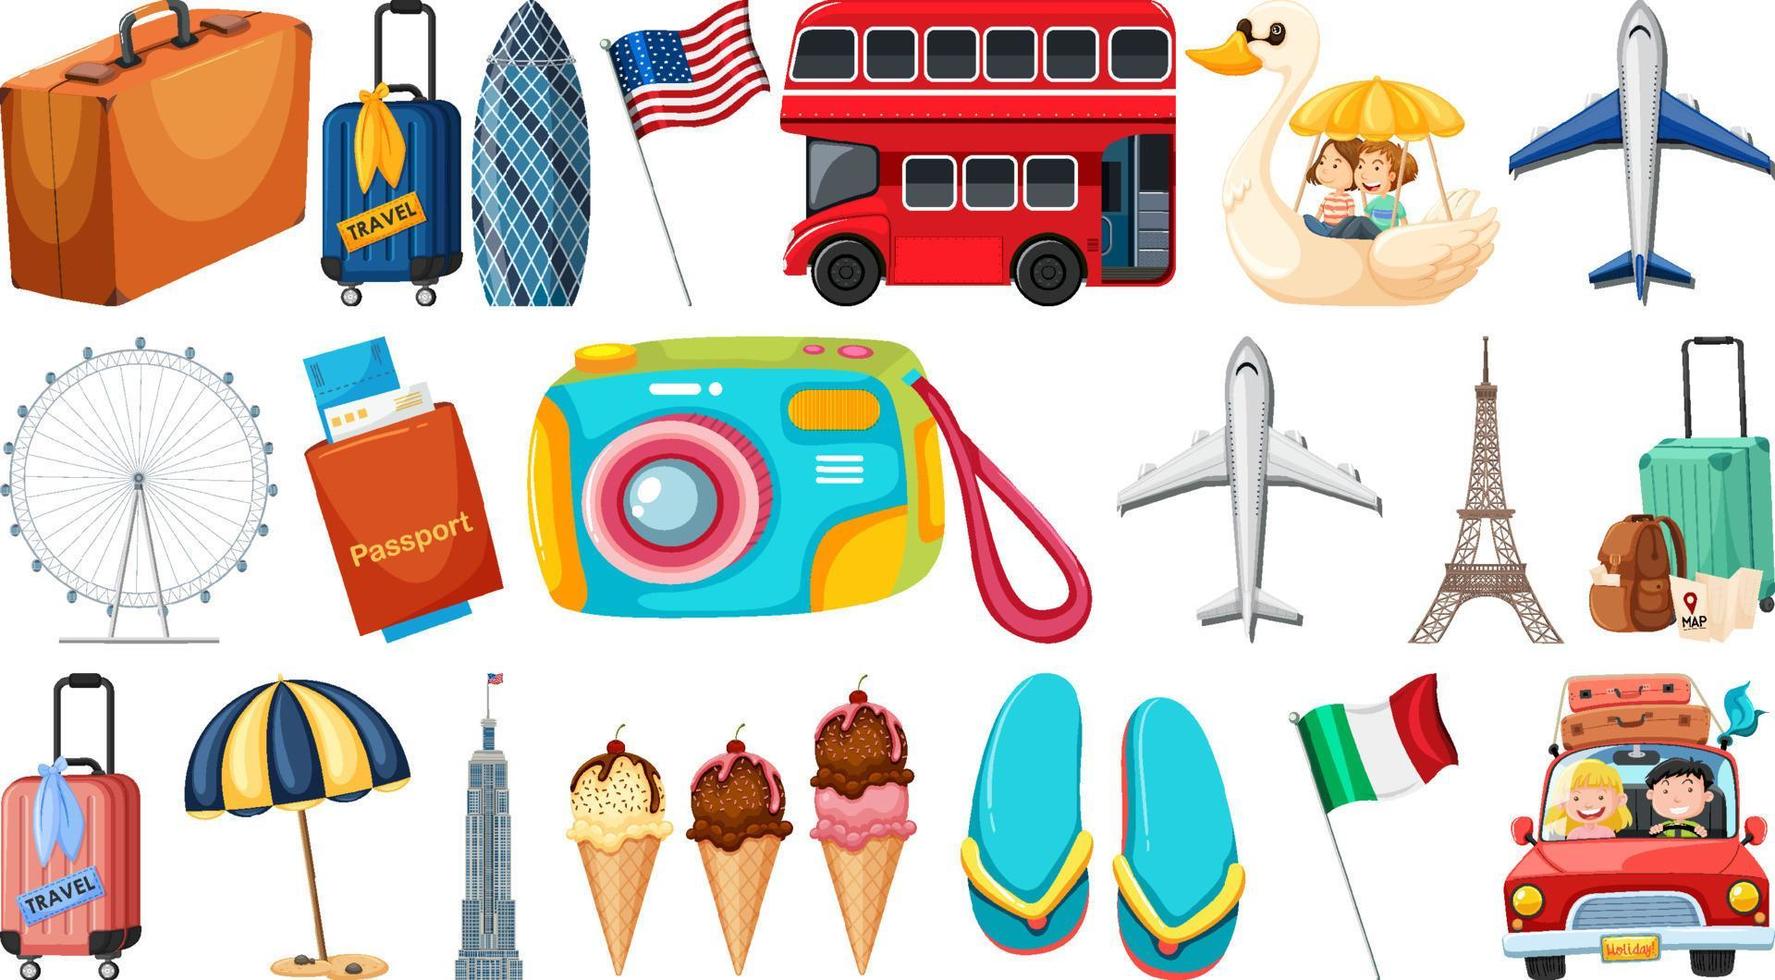 Set of summer vacation objects and elements vector